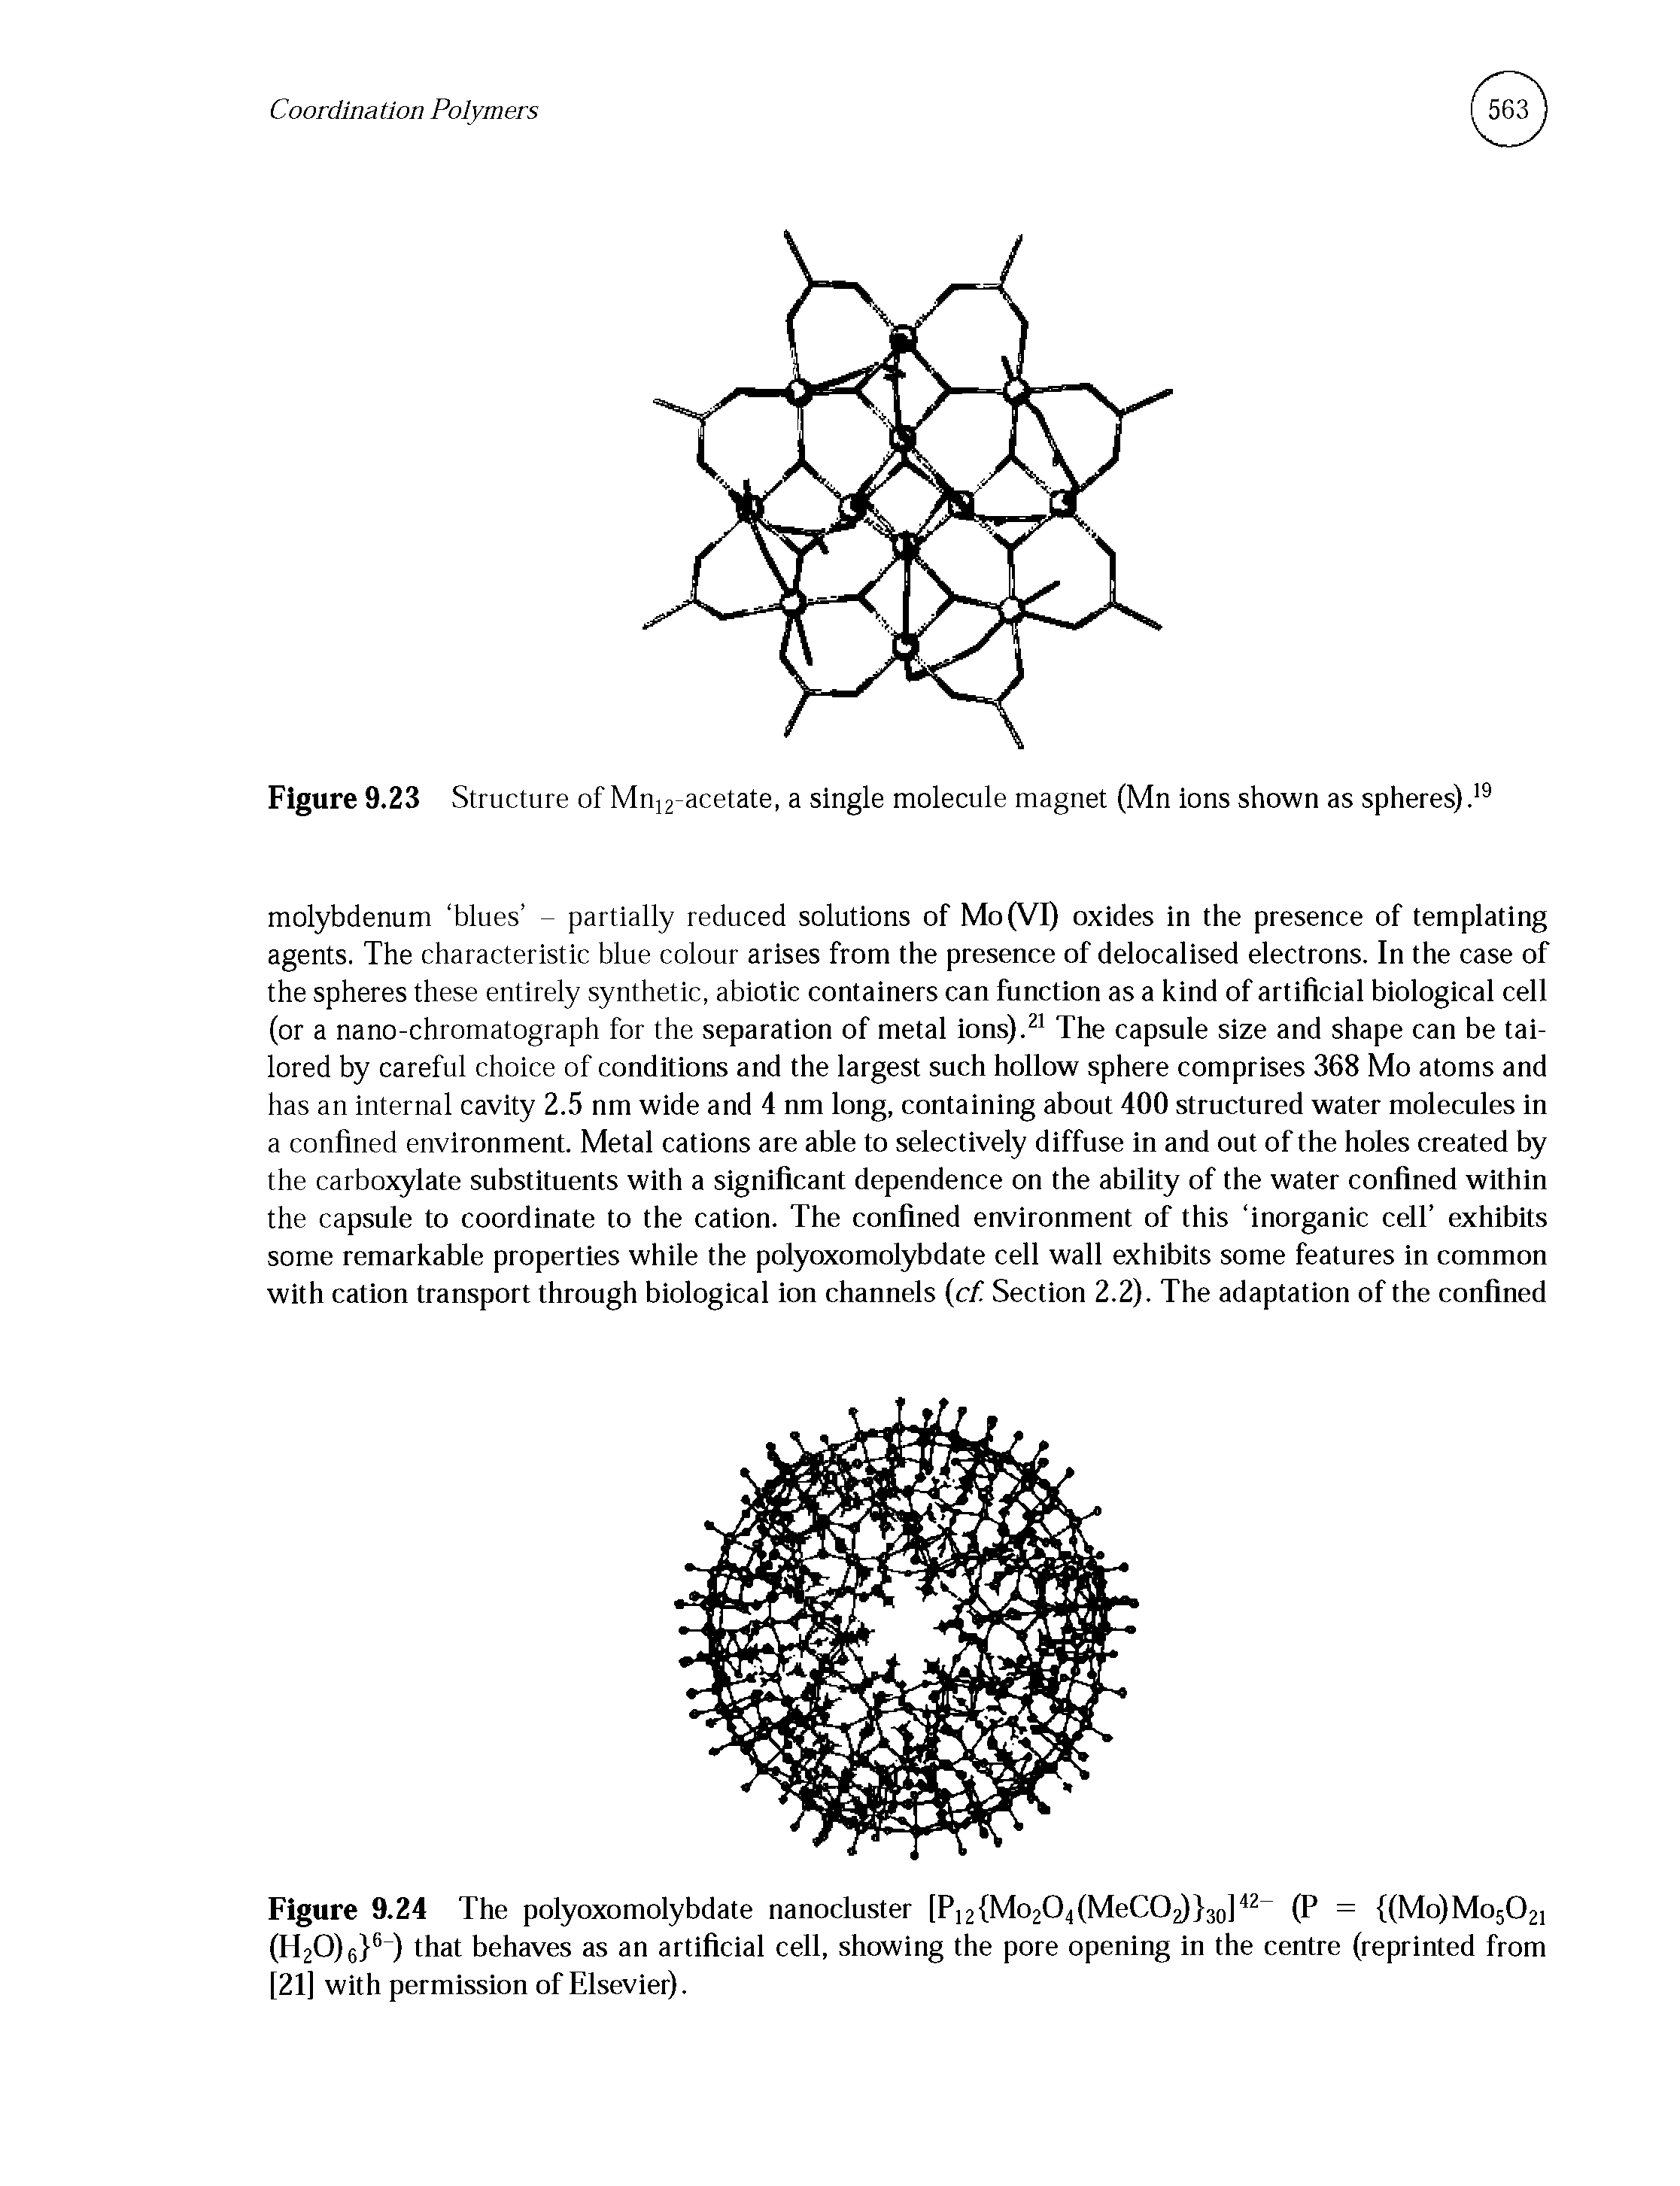 Figure 9.24 The polyoxomolybdate nanocluster [P]2(Mo204(MeCO ) 30l42 (P = (Mo)Mo502i (I I20)6 6 ) that behaves as an artificial cell, showing the pore opening in the centre (reprinted from [21] with permission of Elsevier).